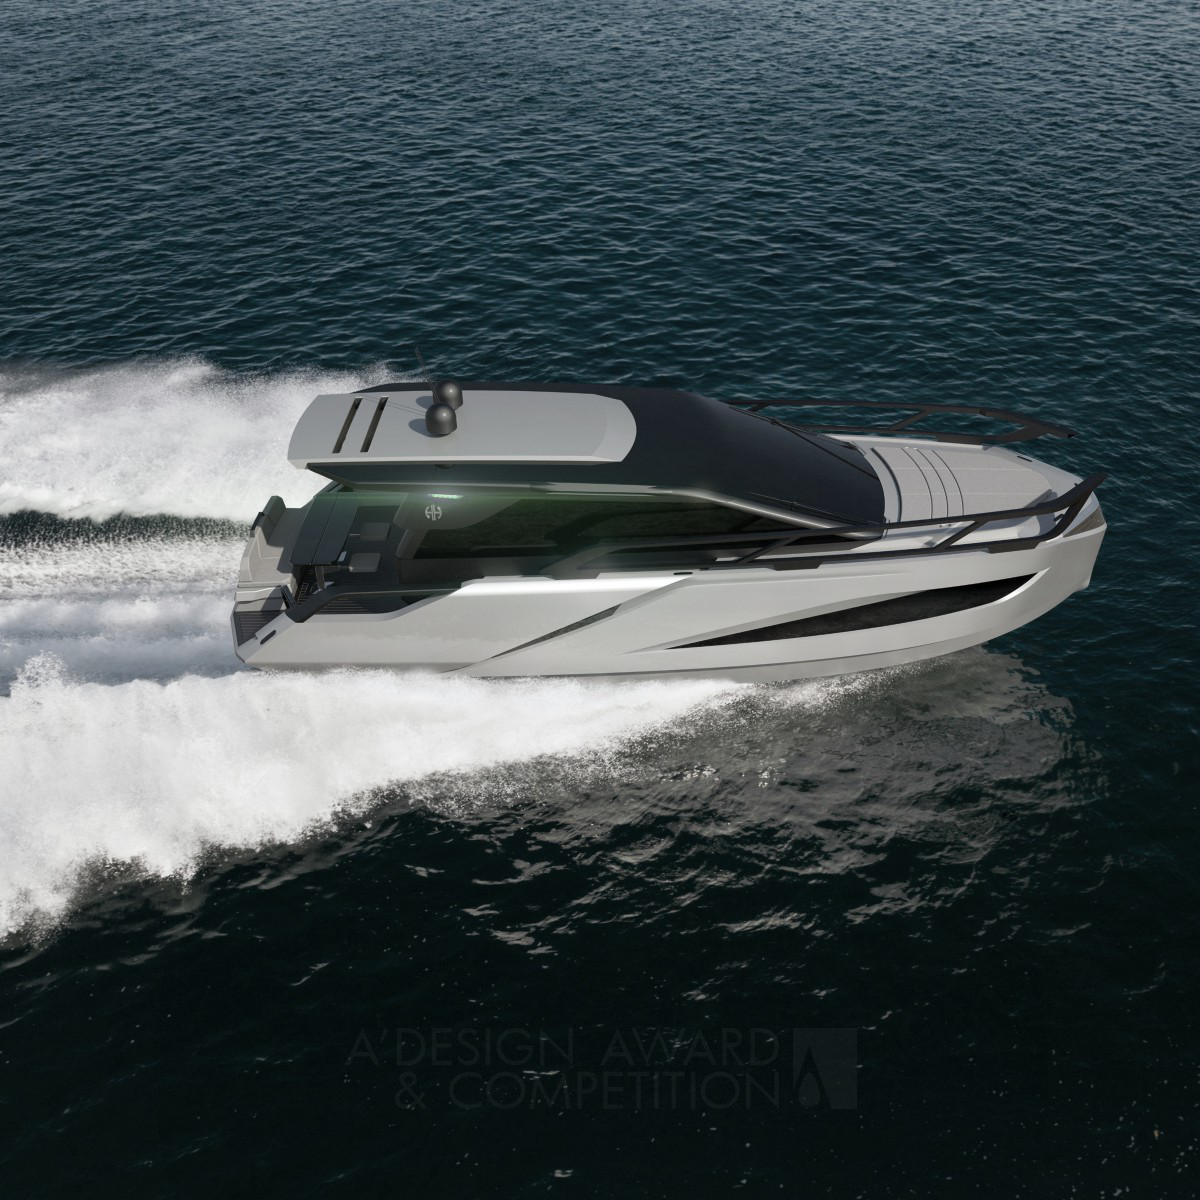 Baran Akalin wins Iron at the prestigious A' Yacht and Marine Vessels Design Award with Hunters 40 Power Yacht.